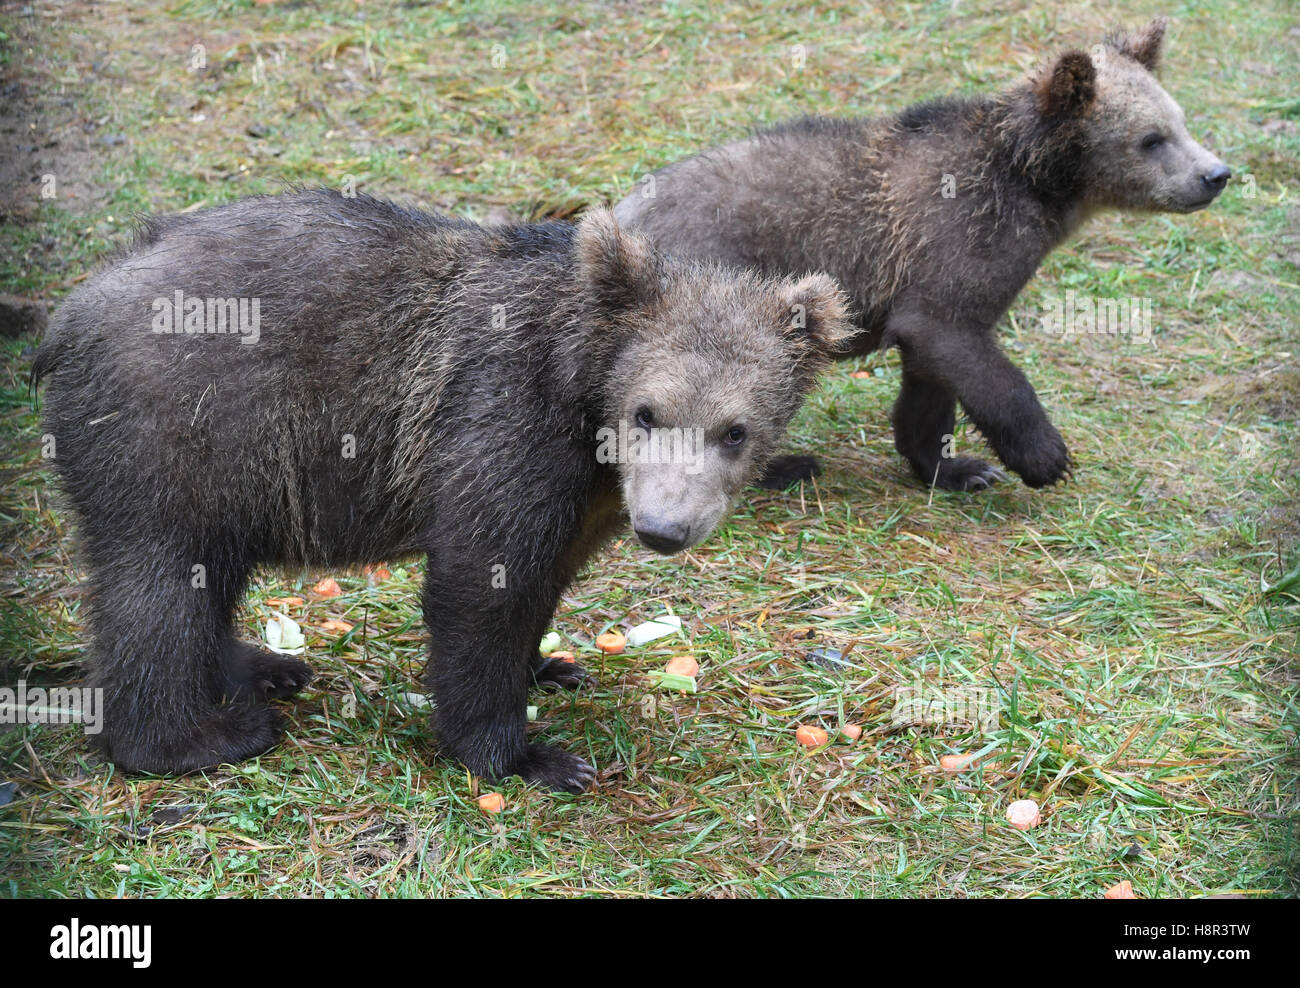 Bad Rippoldsau-Schapbach, Germany. 7th Nov, 2016. The nine month old bear cubs Arthos (R) and Arian prowl around the outer premises of the alternative wolf and bear park Schwarzwald in Bad Rippoldsau-Schapbach, Germany, 7 November 2016. The bears come from Albania and were brought to safety at Europe's first emergency station for orphaned bear cubs. Photo: Uli Deck/dpa/Alamy Live News Stock Photo